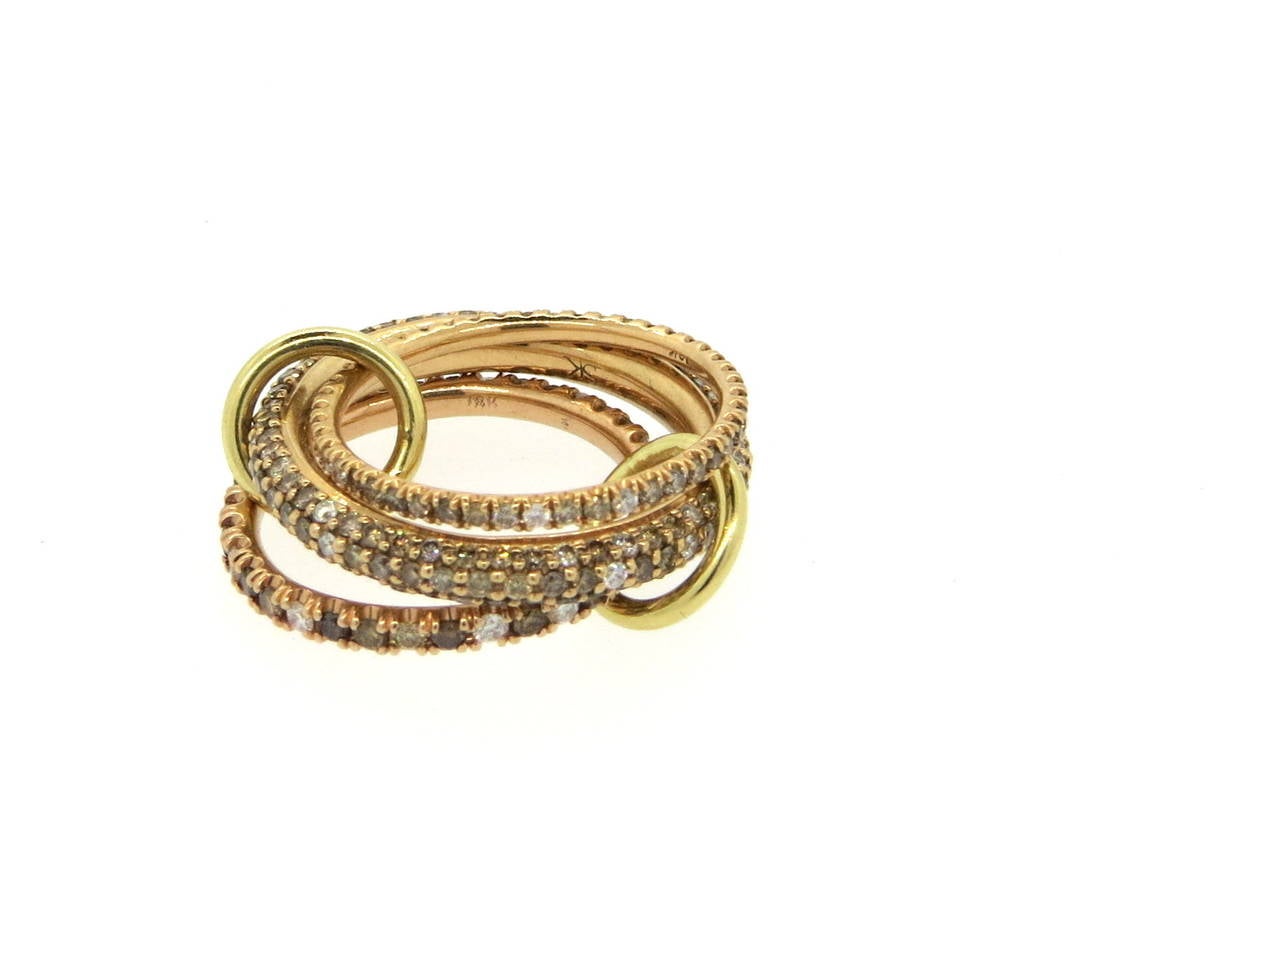 A set of three interlocked band rings, connected with small circles. Rings are set with a total of 2.80ctw in white, champagne and cognac diamonds. Rings make a size 8, and are approximately 8mm wide. Weight of the set - 11.5 grams
Retail for $8400